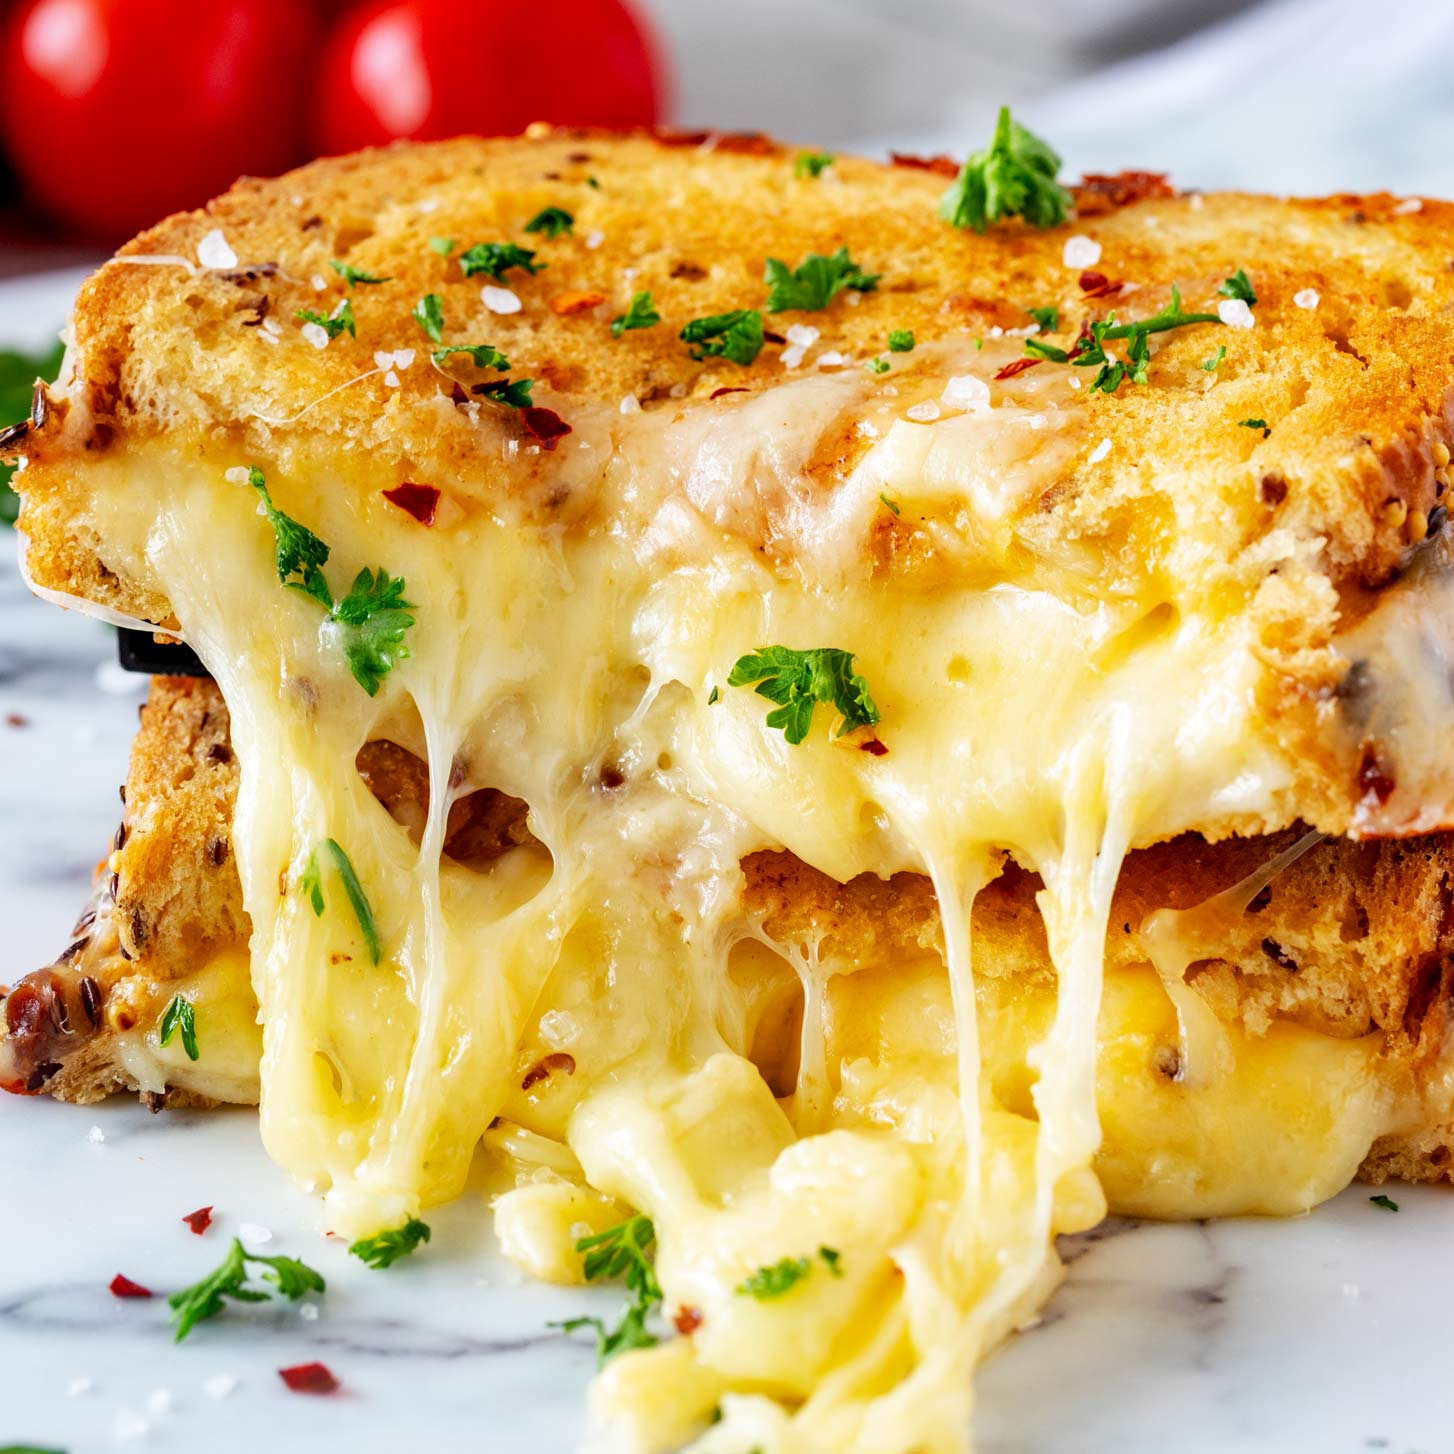 https://kicking-carbs.com/wp-content/uploads/2023/01/SQ-keto-grilled-cheese-h2.jpg